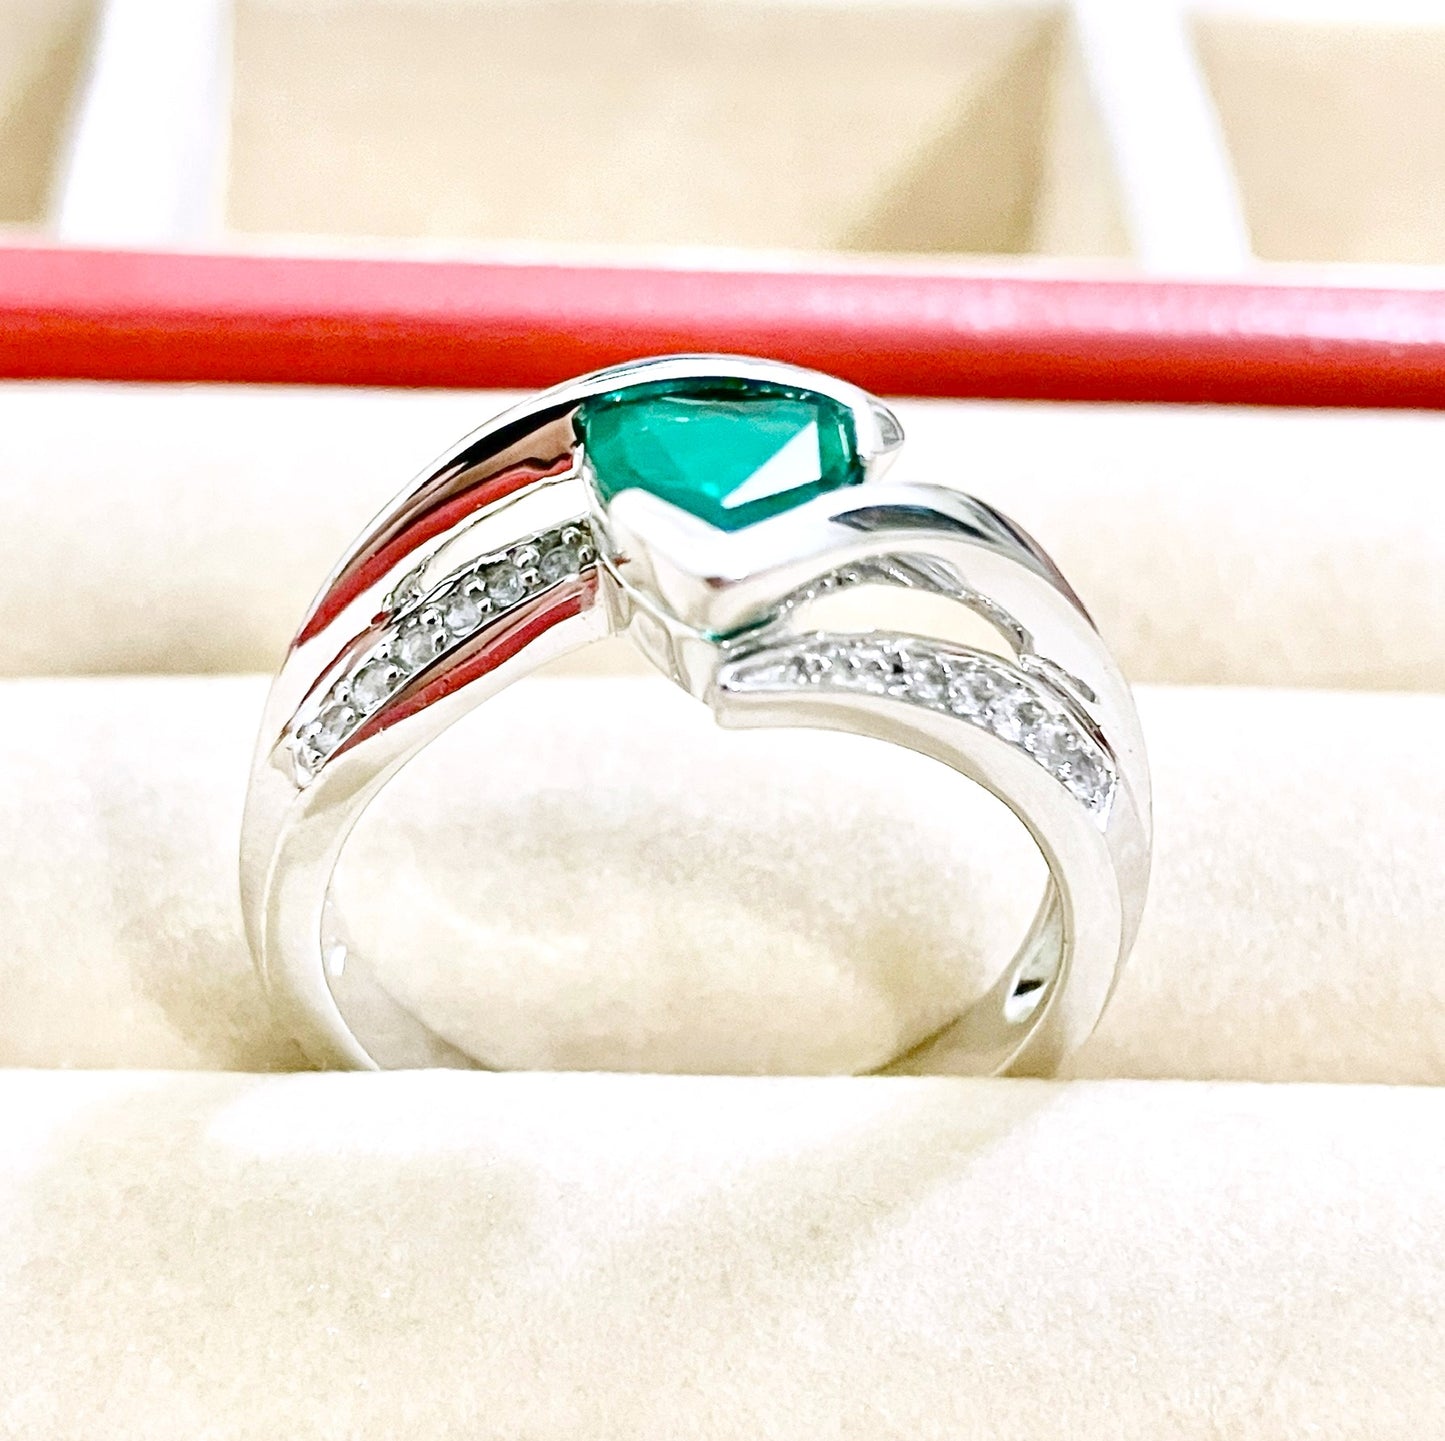 Triangular Brilliant Cut “Emerald” in Curved Bypass Shank with “Diamond” Accents Ring